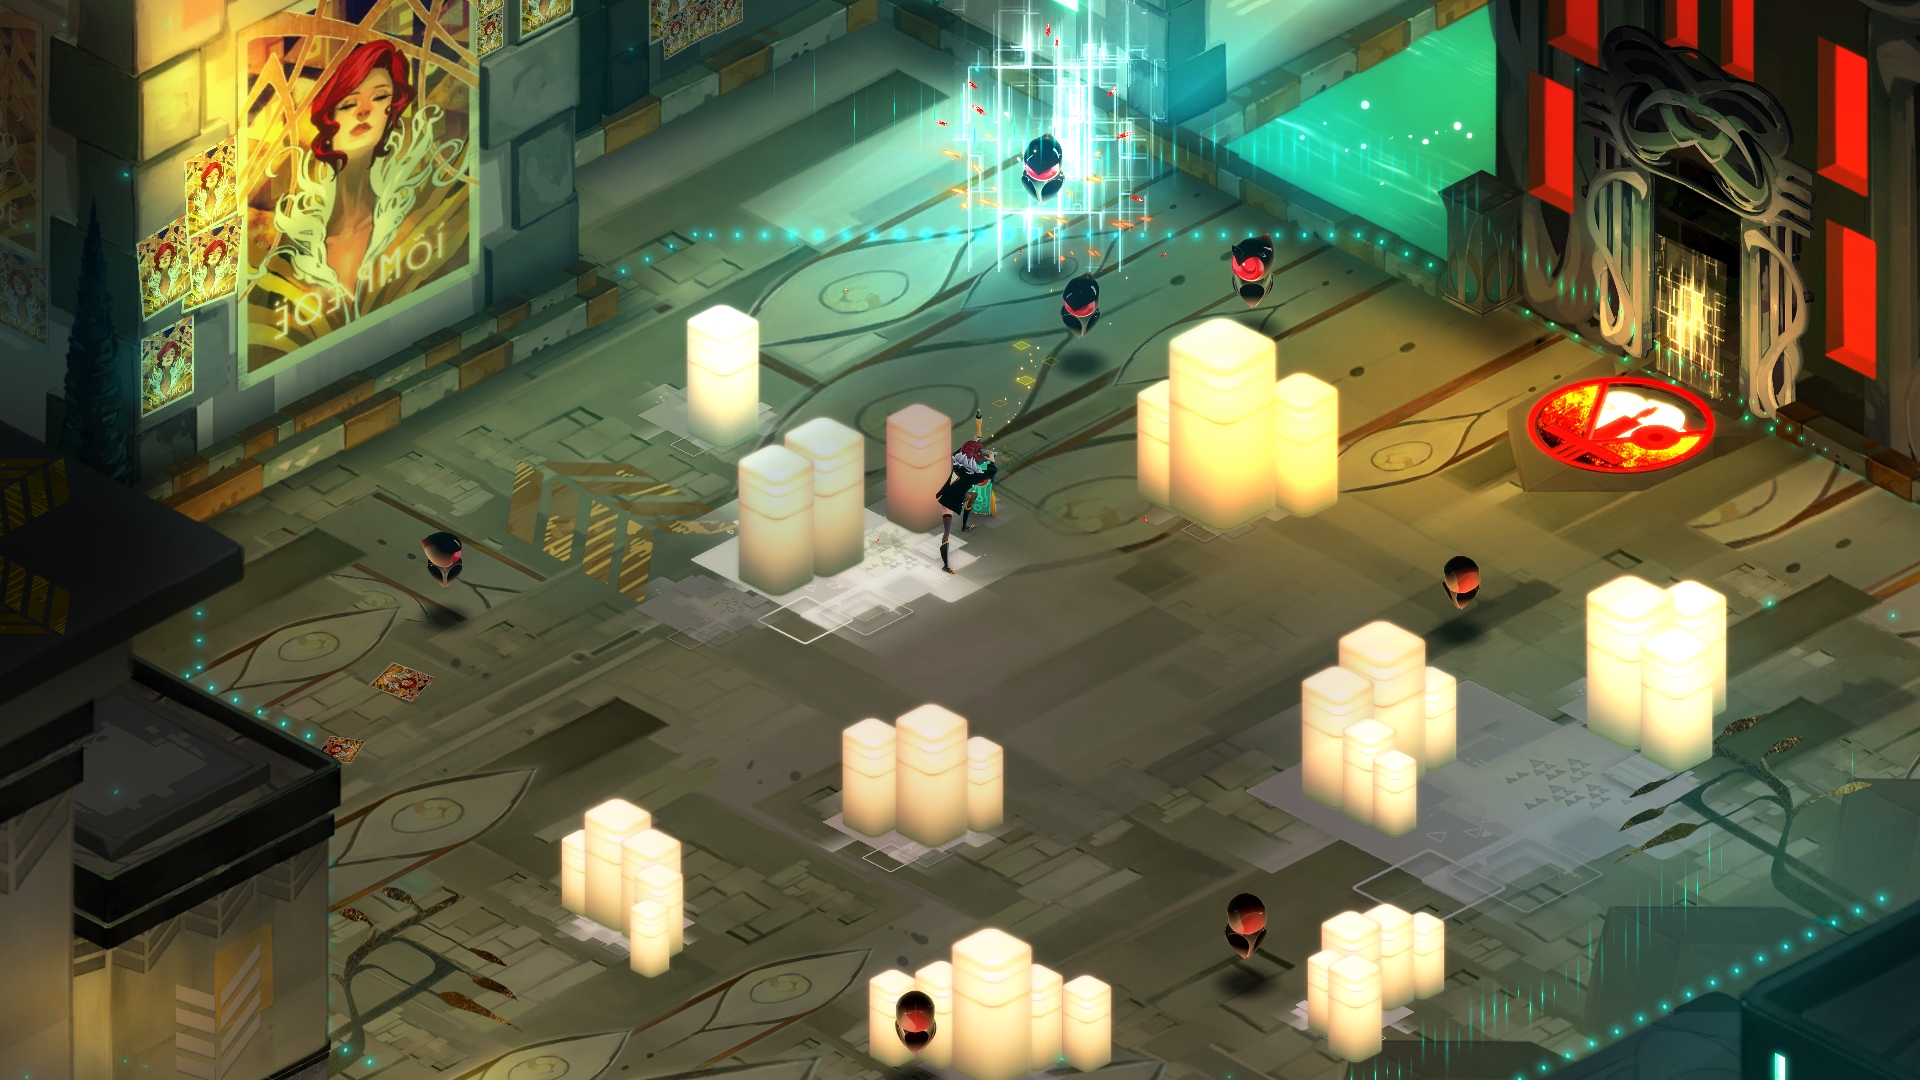 Bastion developer's next game, Transistor, is coming to PC and PS4 in May - GameSpot